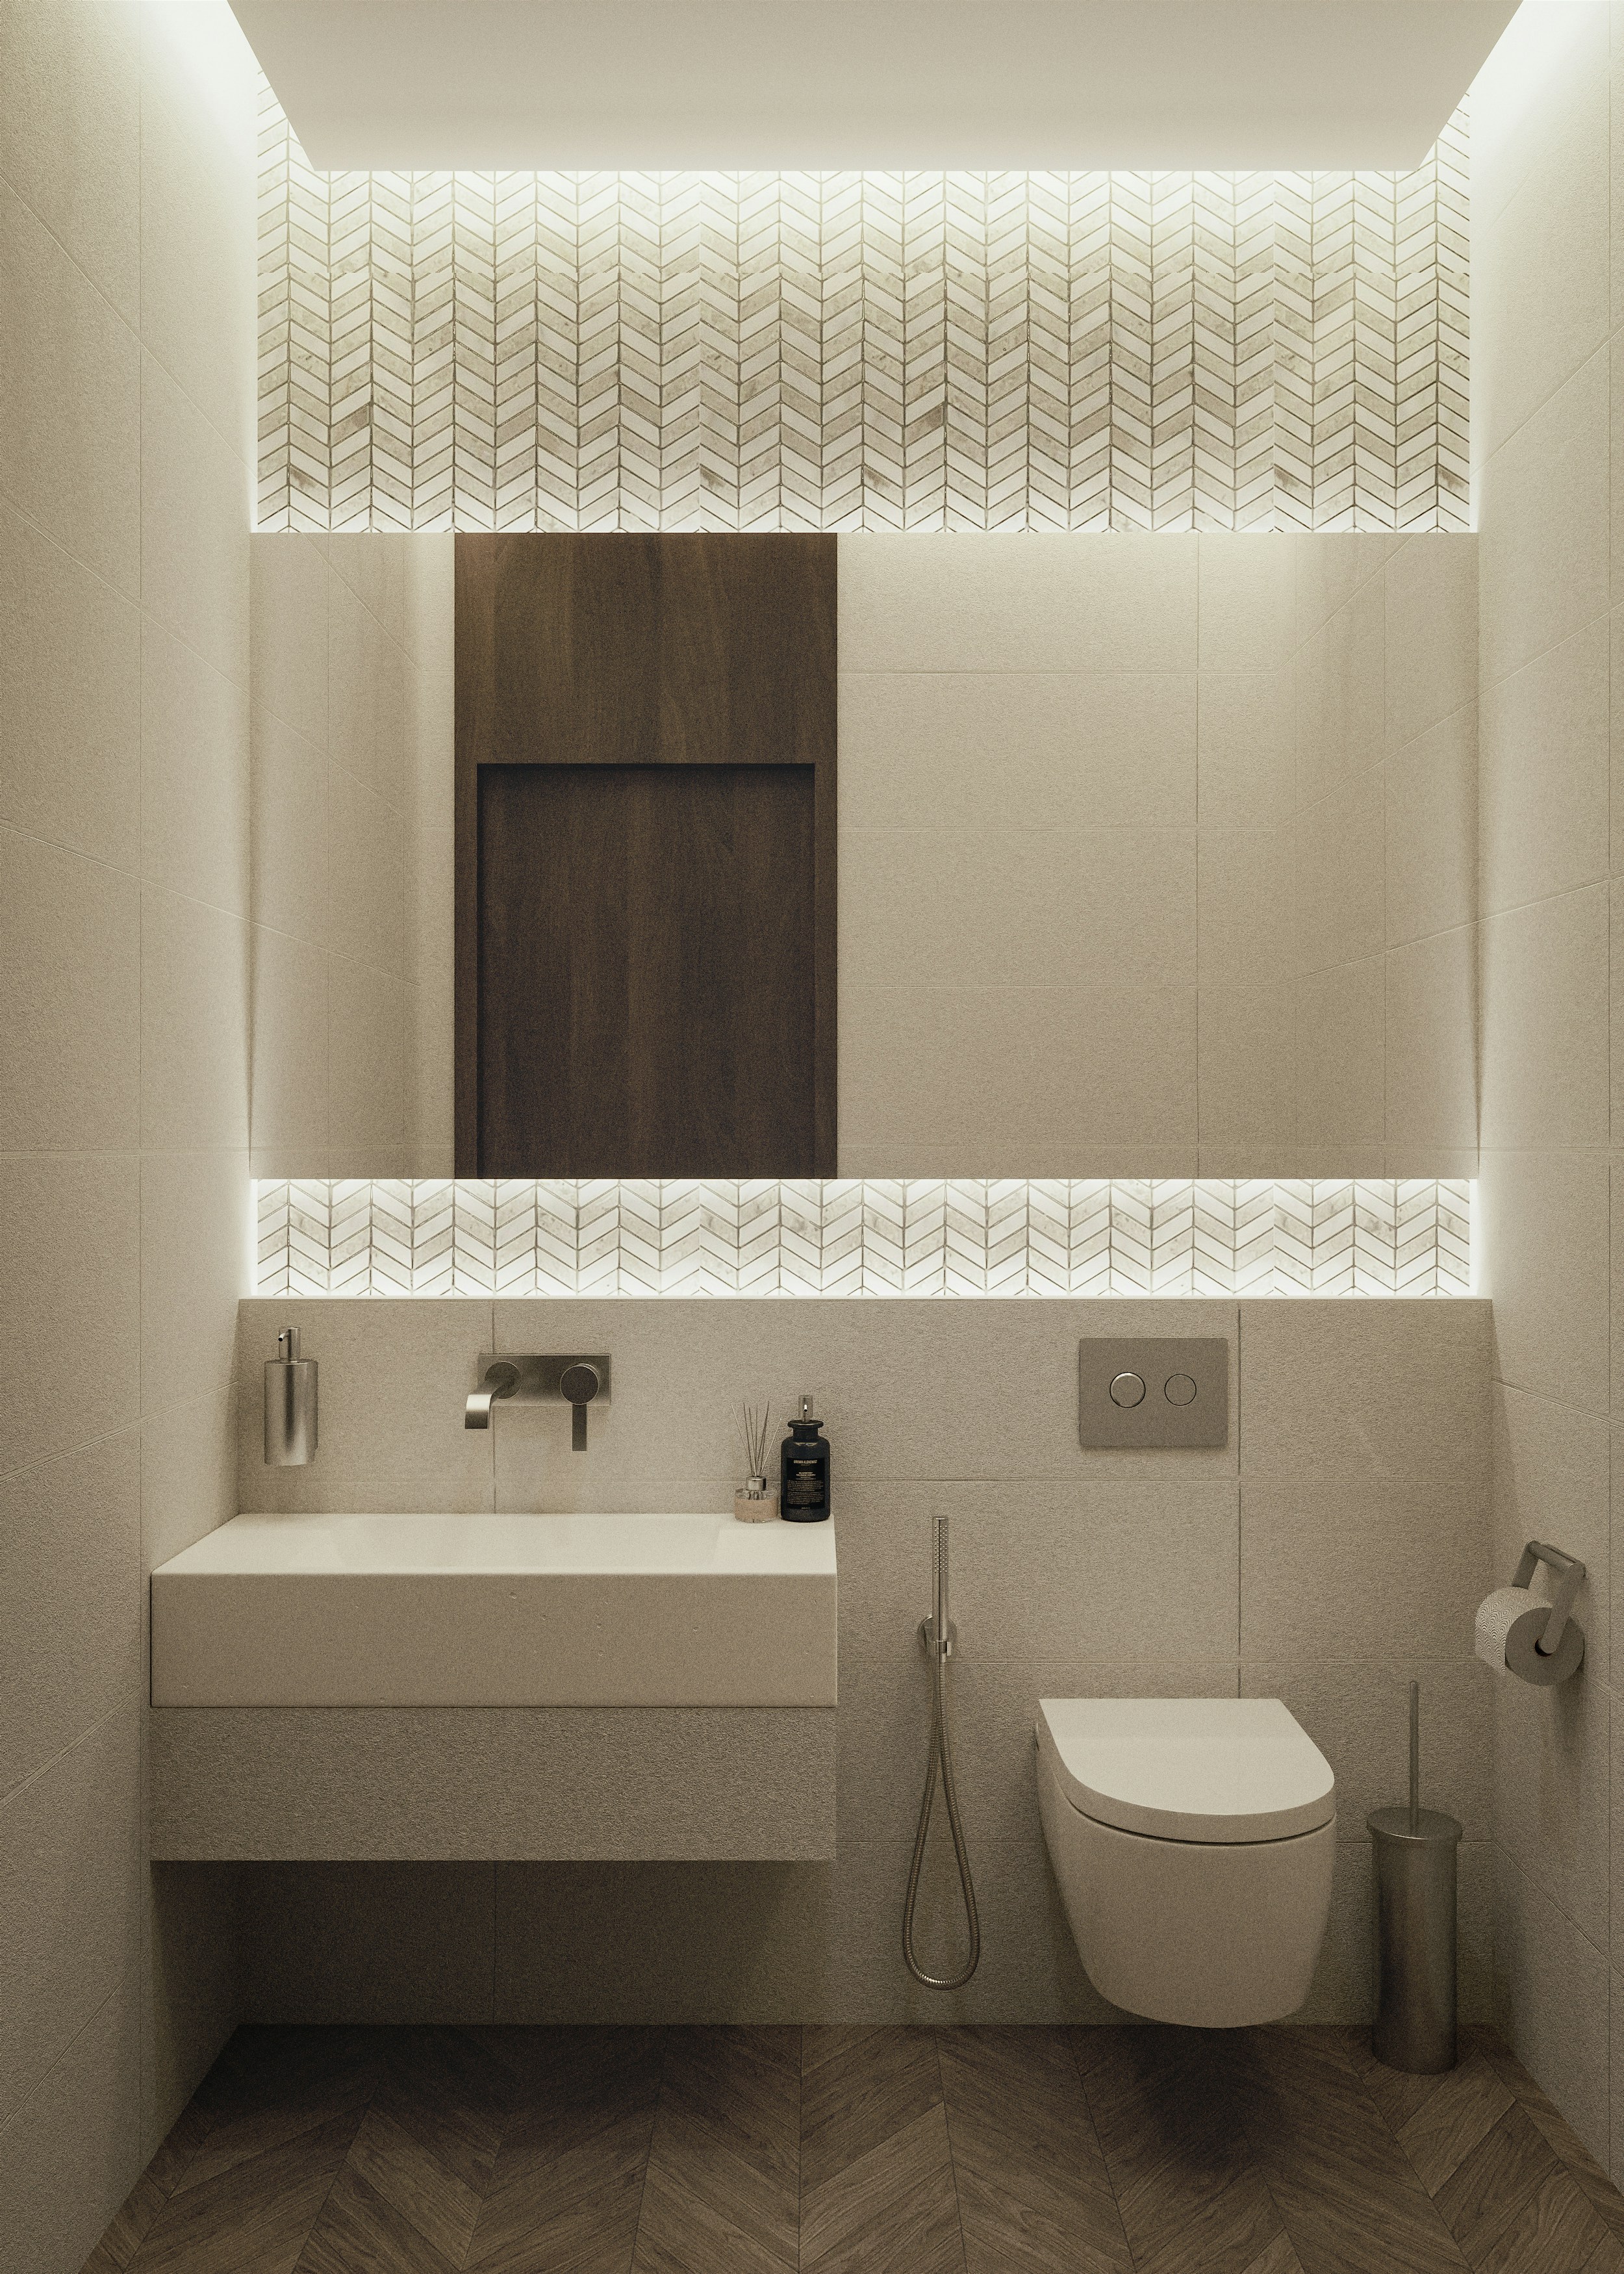 Sleek and modern wall mount toilet in contemporary bathroom